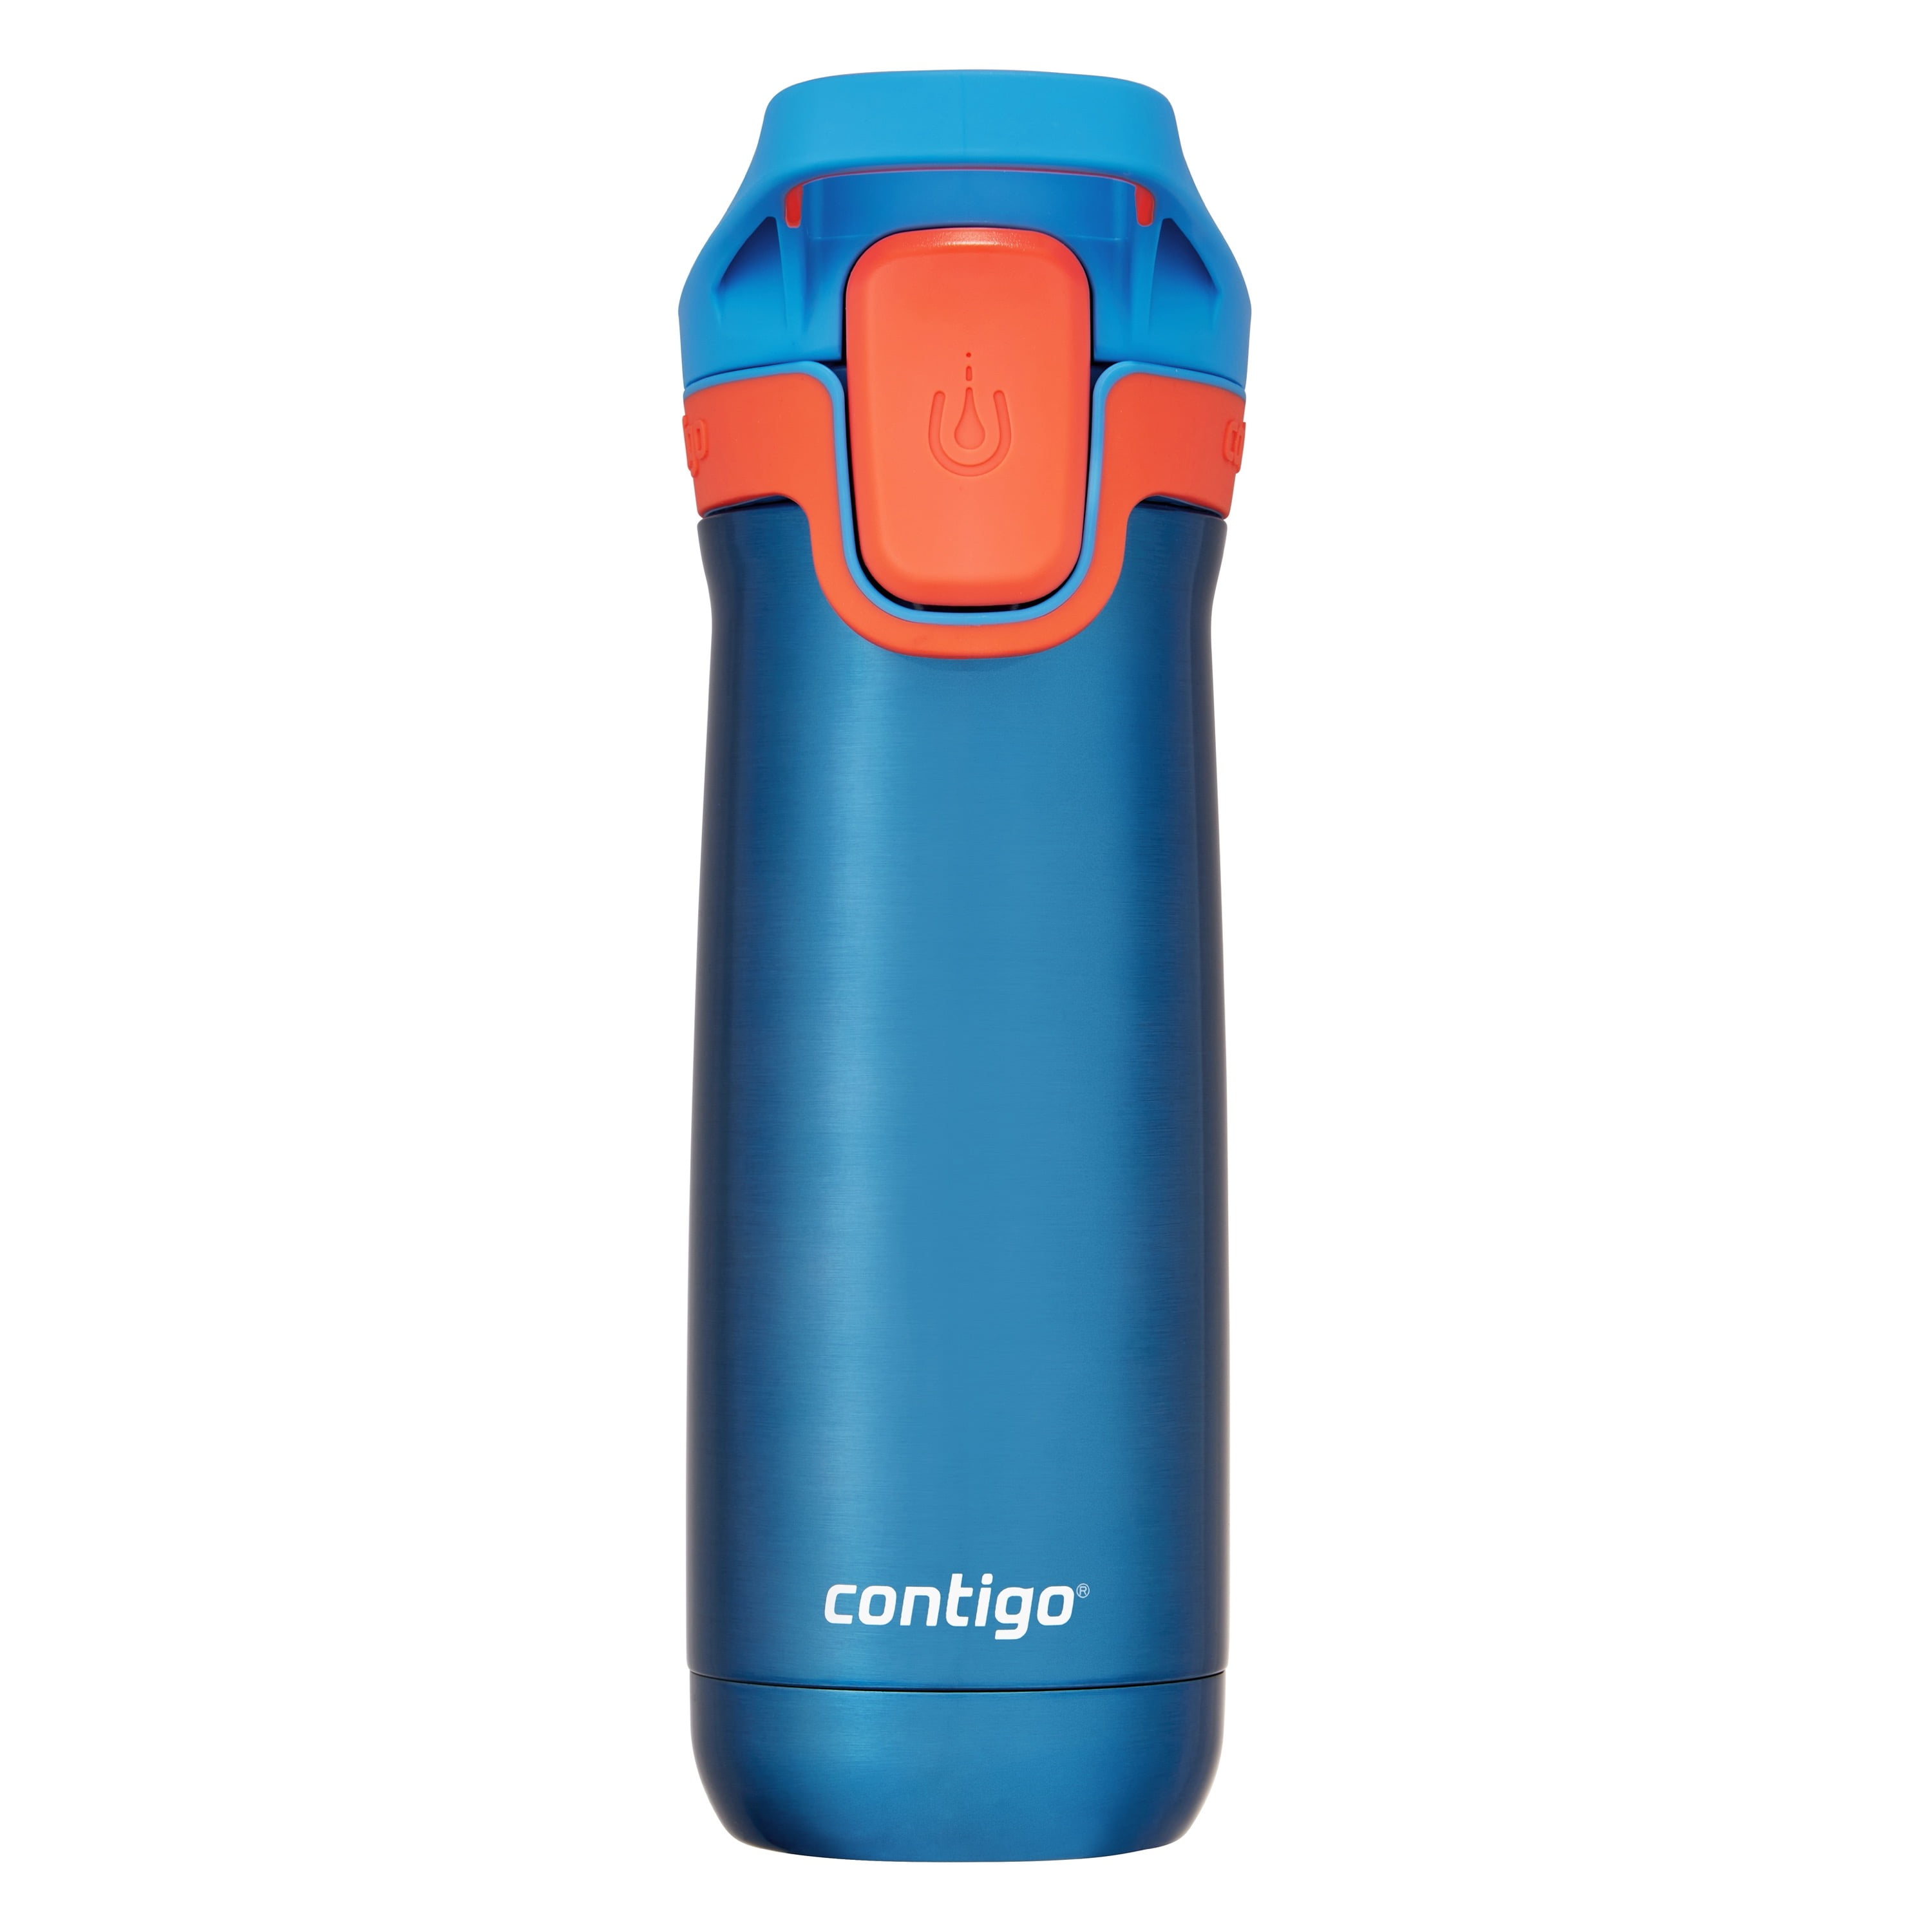 Contigo Kids' Casey Stainless Steel Water Bottle with Spill-Proof